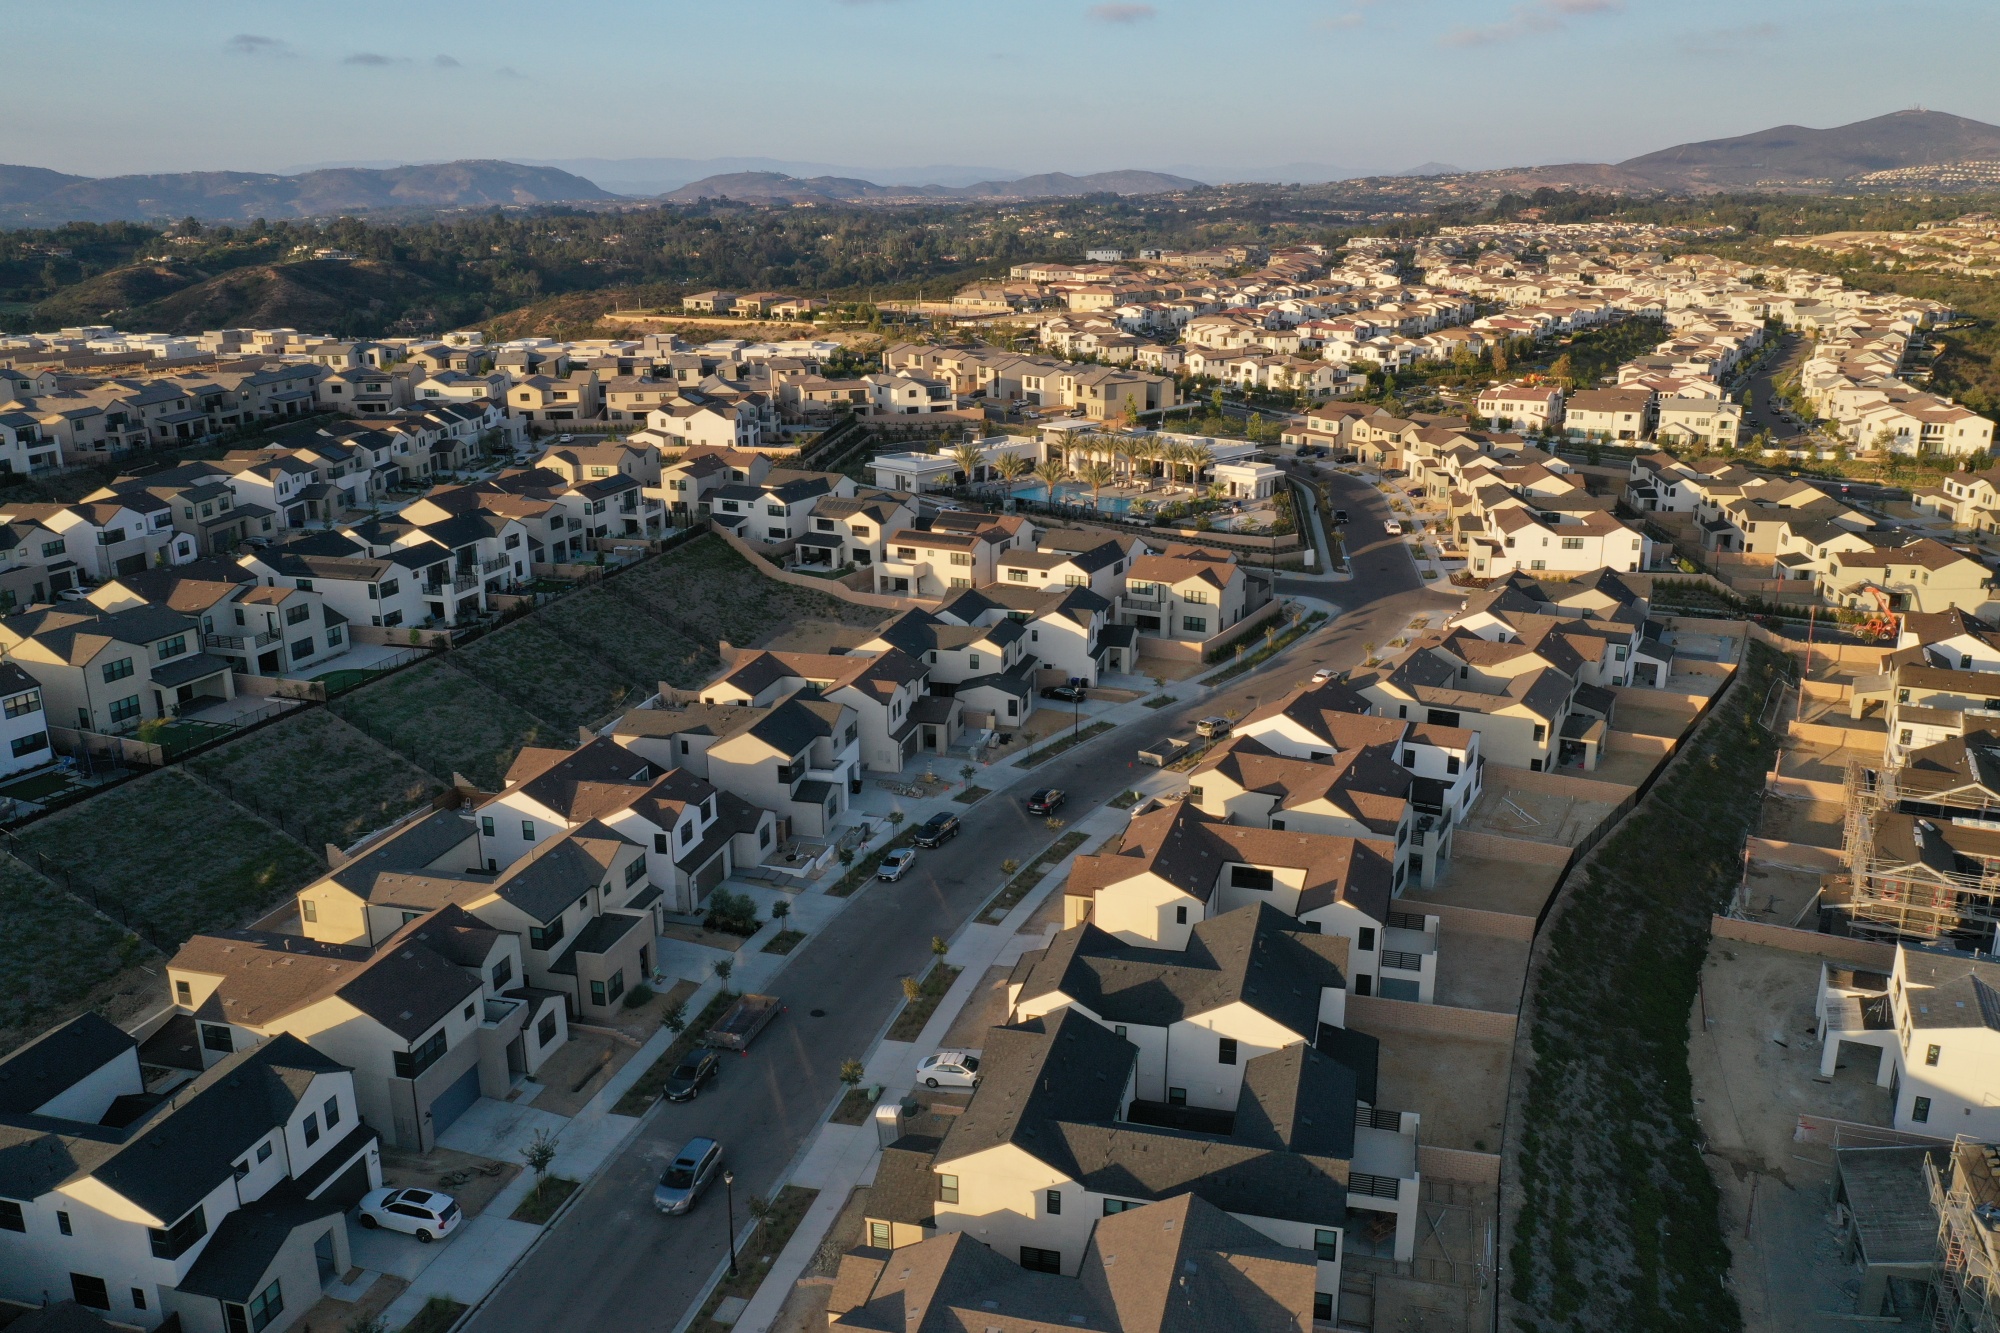 New homes built by Pardee Construction LLC are seen in this aerial photograph taken over the Pacific Highlands Ranch master planned community in San Diego, California.